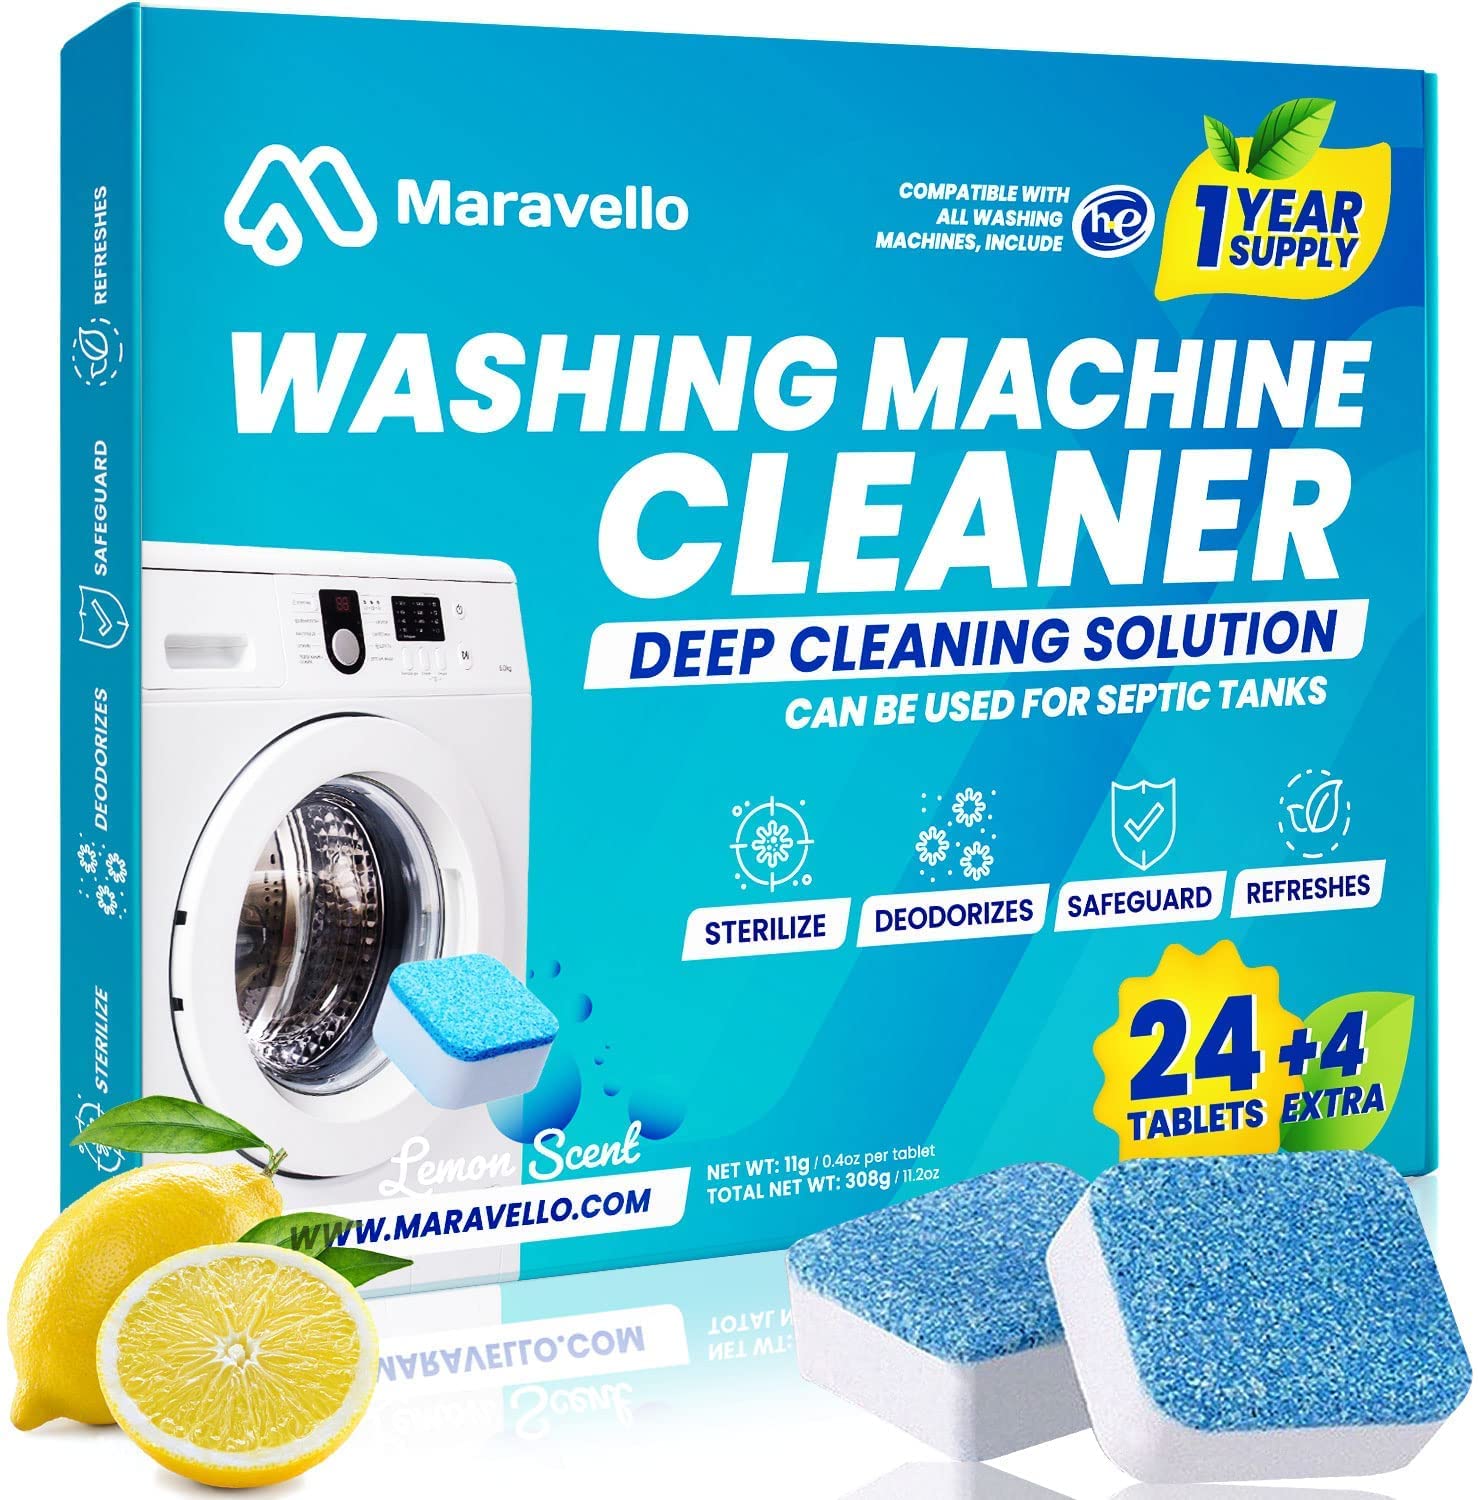 Maravello Washing Machine Cleaner Descaler - 28 Count Deep Cleaning Tablets for He Front Load and Top Load Washers, Mold and Stain Remover for Laundry  (Lemon, 28 Co $12.99